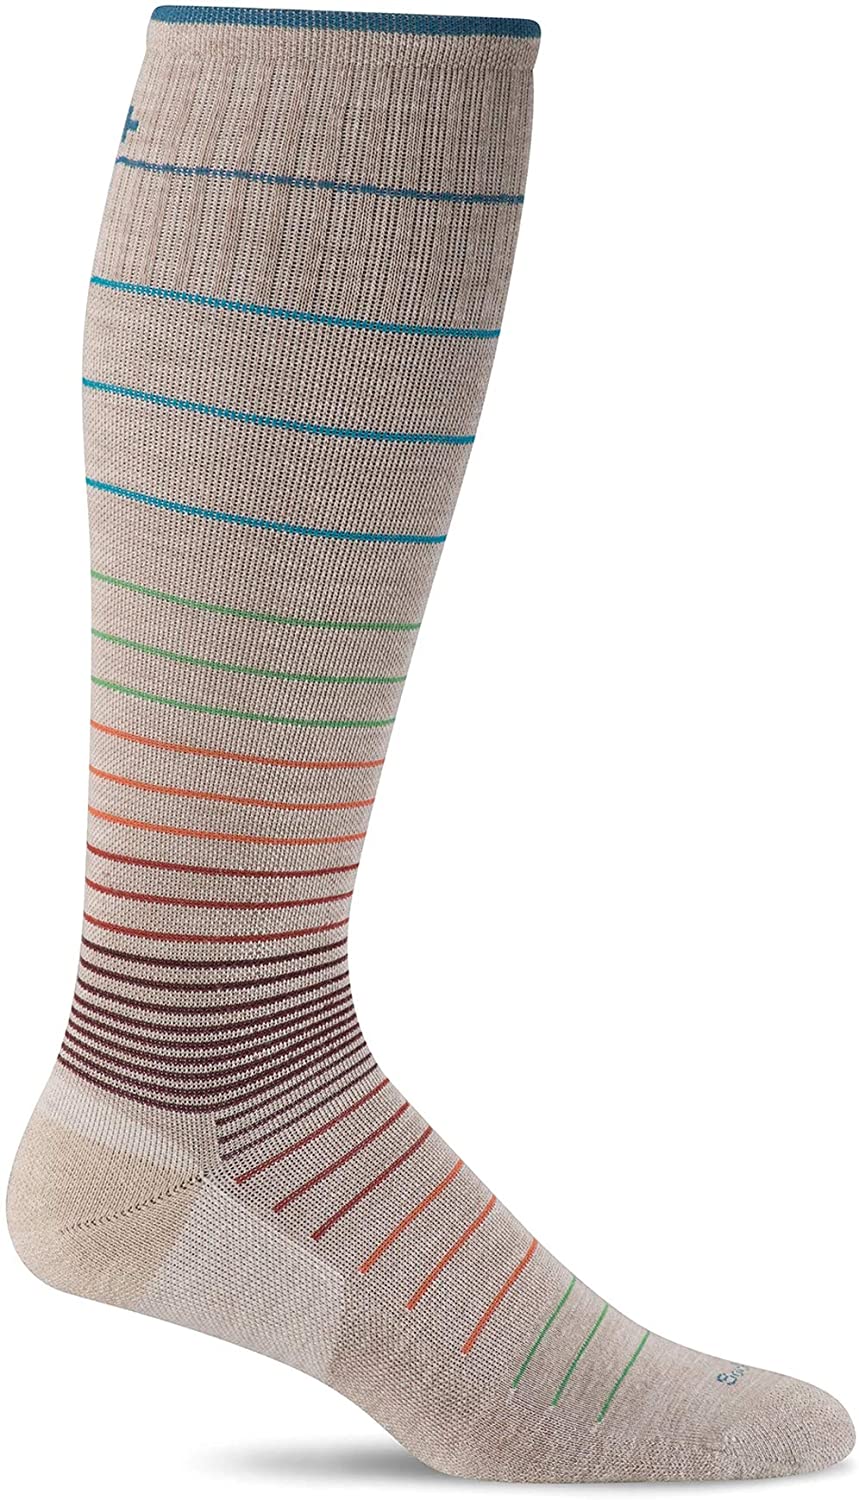 Sockwell Women's Circulator Moderate Graduated Compression Sock in Barley from the side